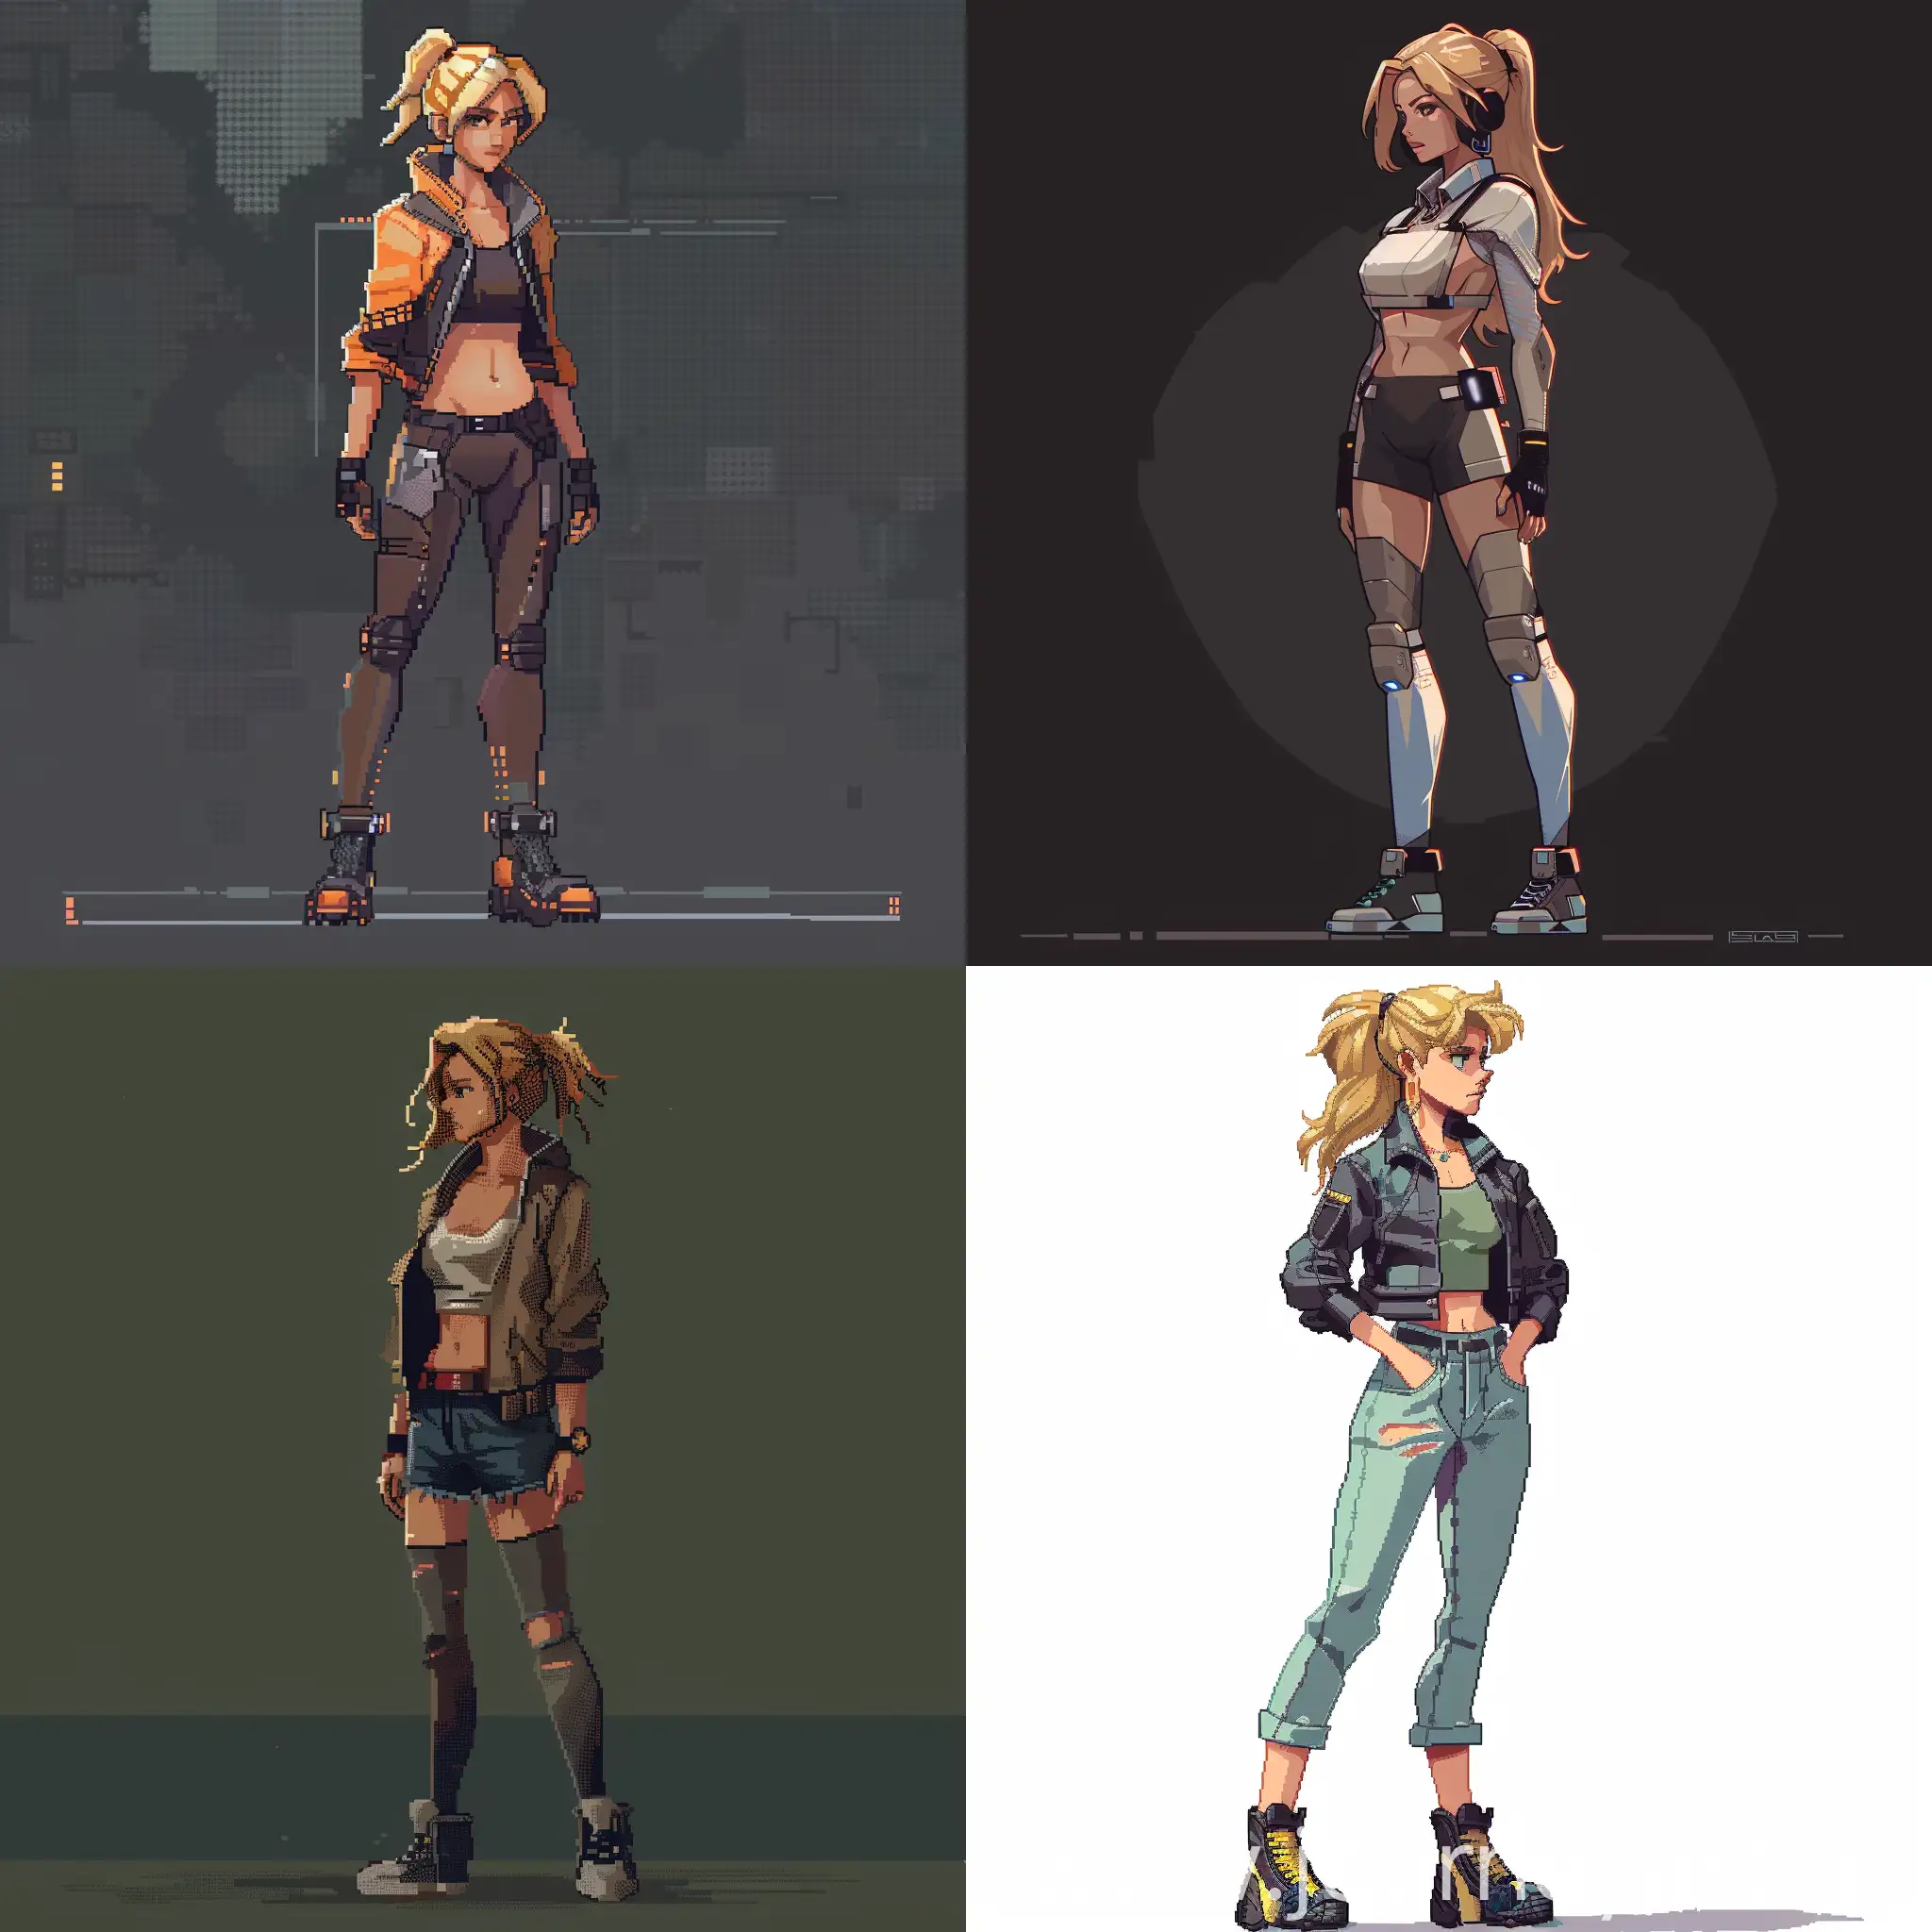 pixel art style, high detail, 2d game character, blond or light brown hair, futurism, tight clothes, full-length, side view